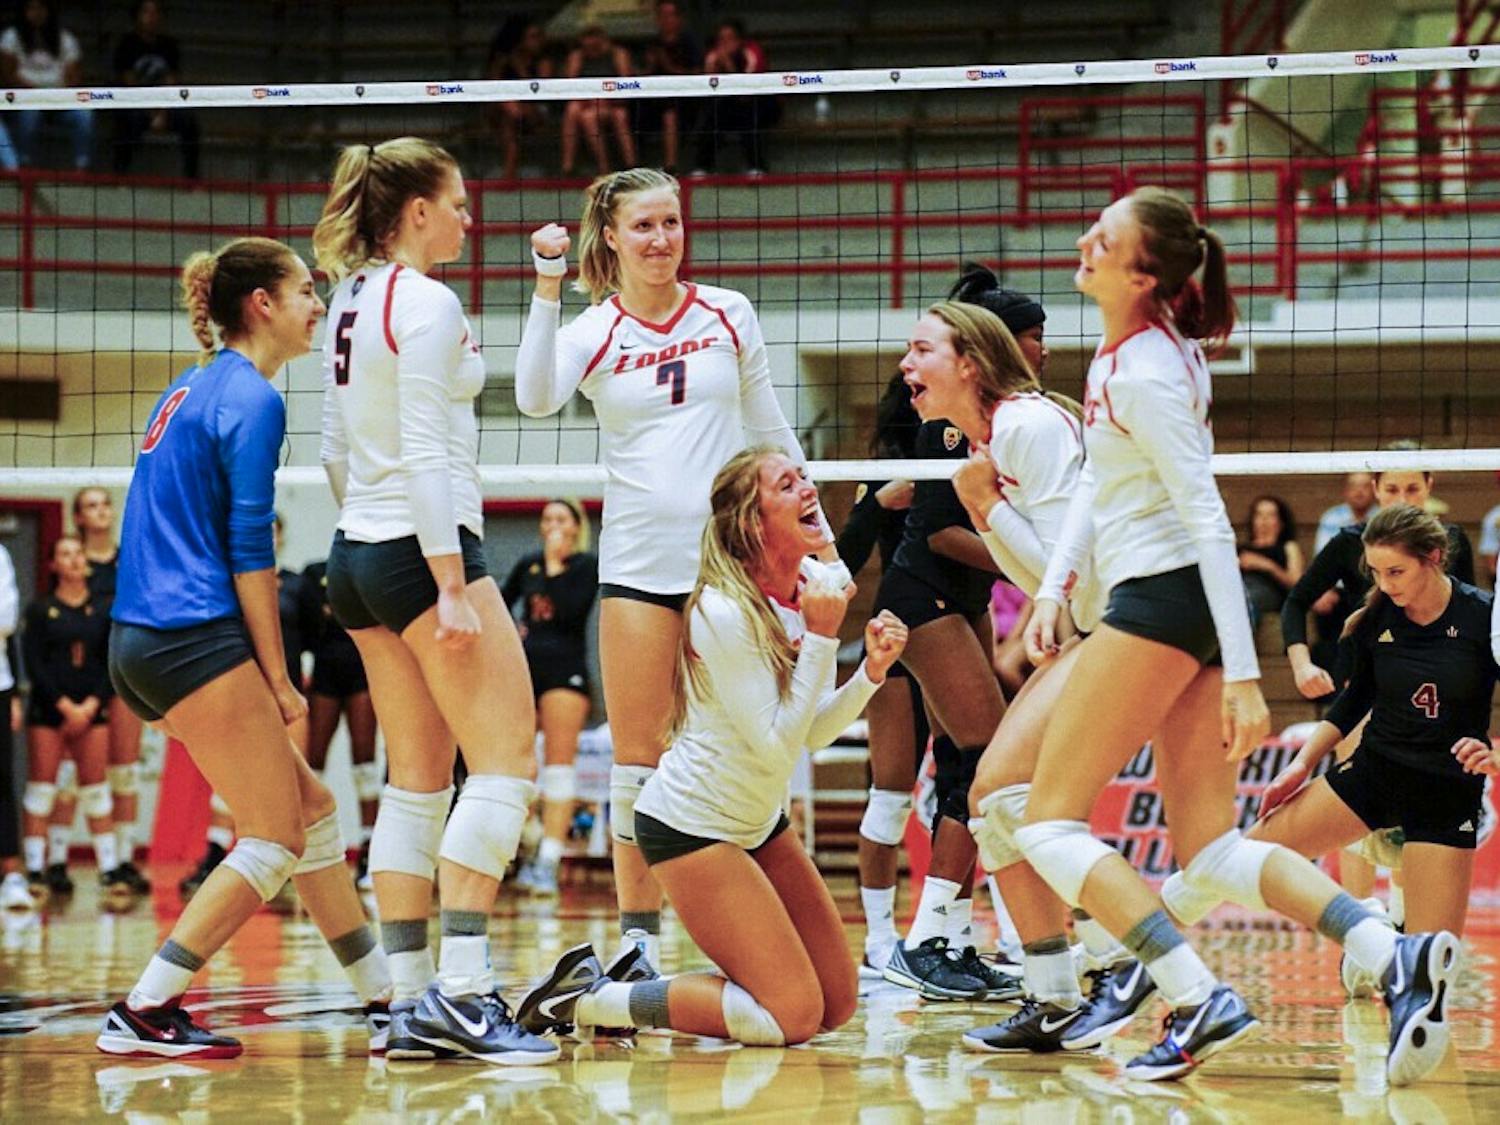 The Lobos celebrate a kill against Arizona State at Johnson Center on Friday August 26, 2016 as their second game in the UNM Tournament. The Lobos beat the Sun Devils 3-1 and will play Idaho and Fairfield Saturday August 27, 2016.&nbsp;